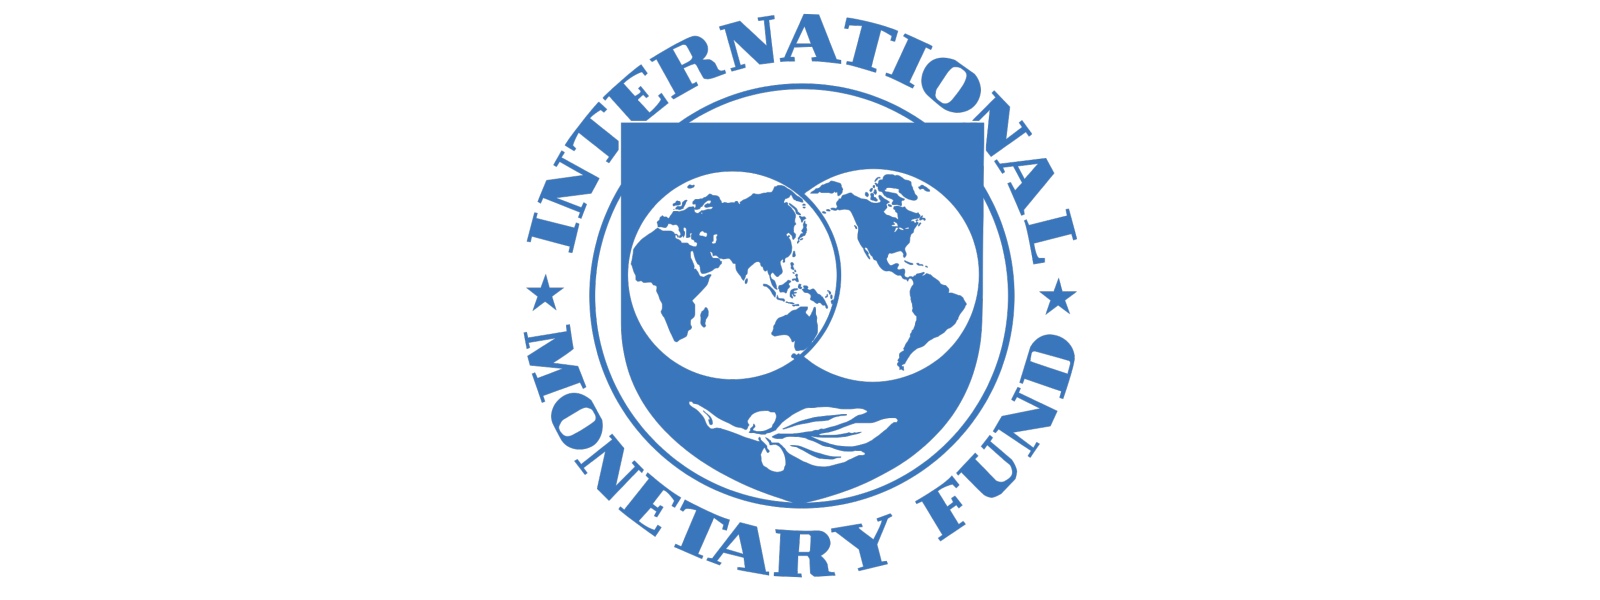 Difficult to predict Sri Lanka’s bailout timeline – IMF